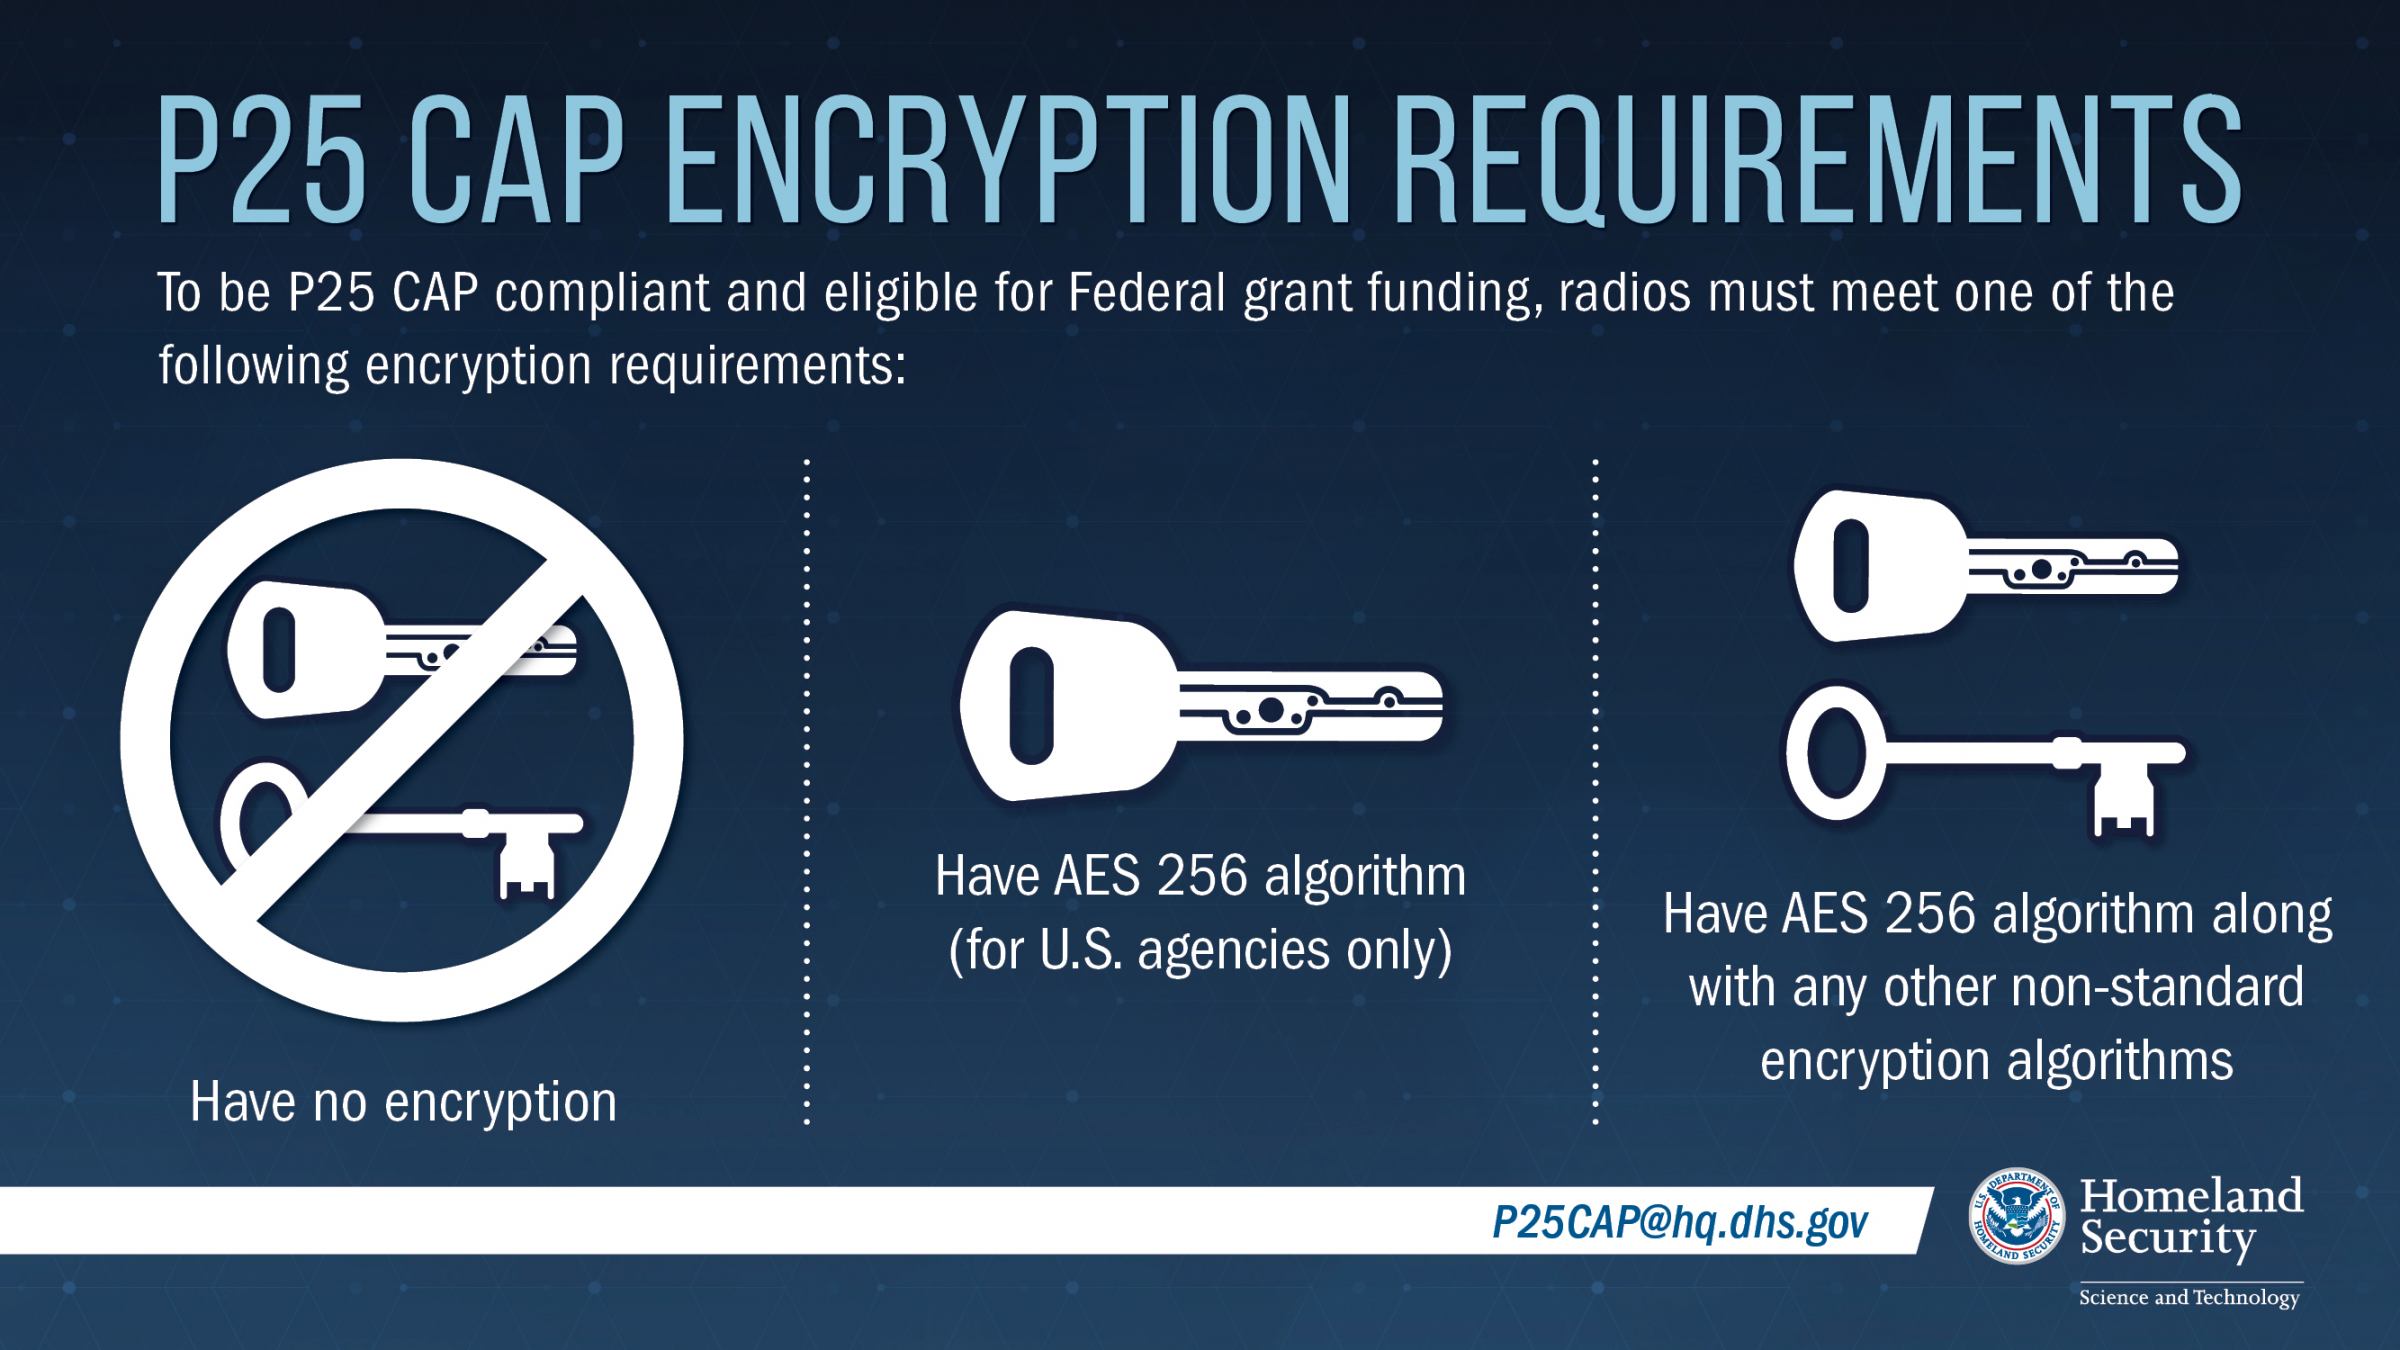 P25 CAP ENCRYPTION REQUIREMENTS: To be P25 CAP compliant, and eligible for Federal grant funding, radio must meet one of the following encryption requirements: 1. Have no encryption; 2. Have AES 256 algorithm (for U.S. agencies only); or 3. Have AES 256 algorithm along with any other non-standard encryption algorithms. P25CAP@hq.dhs.gov.